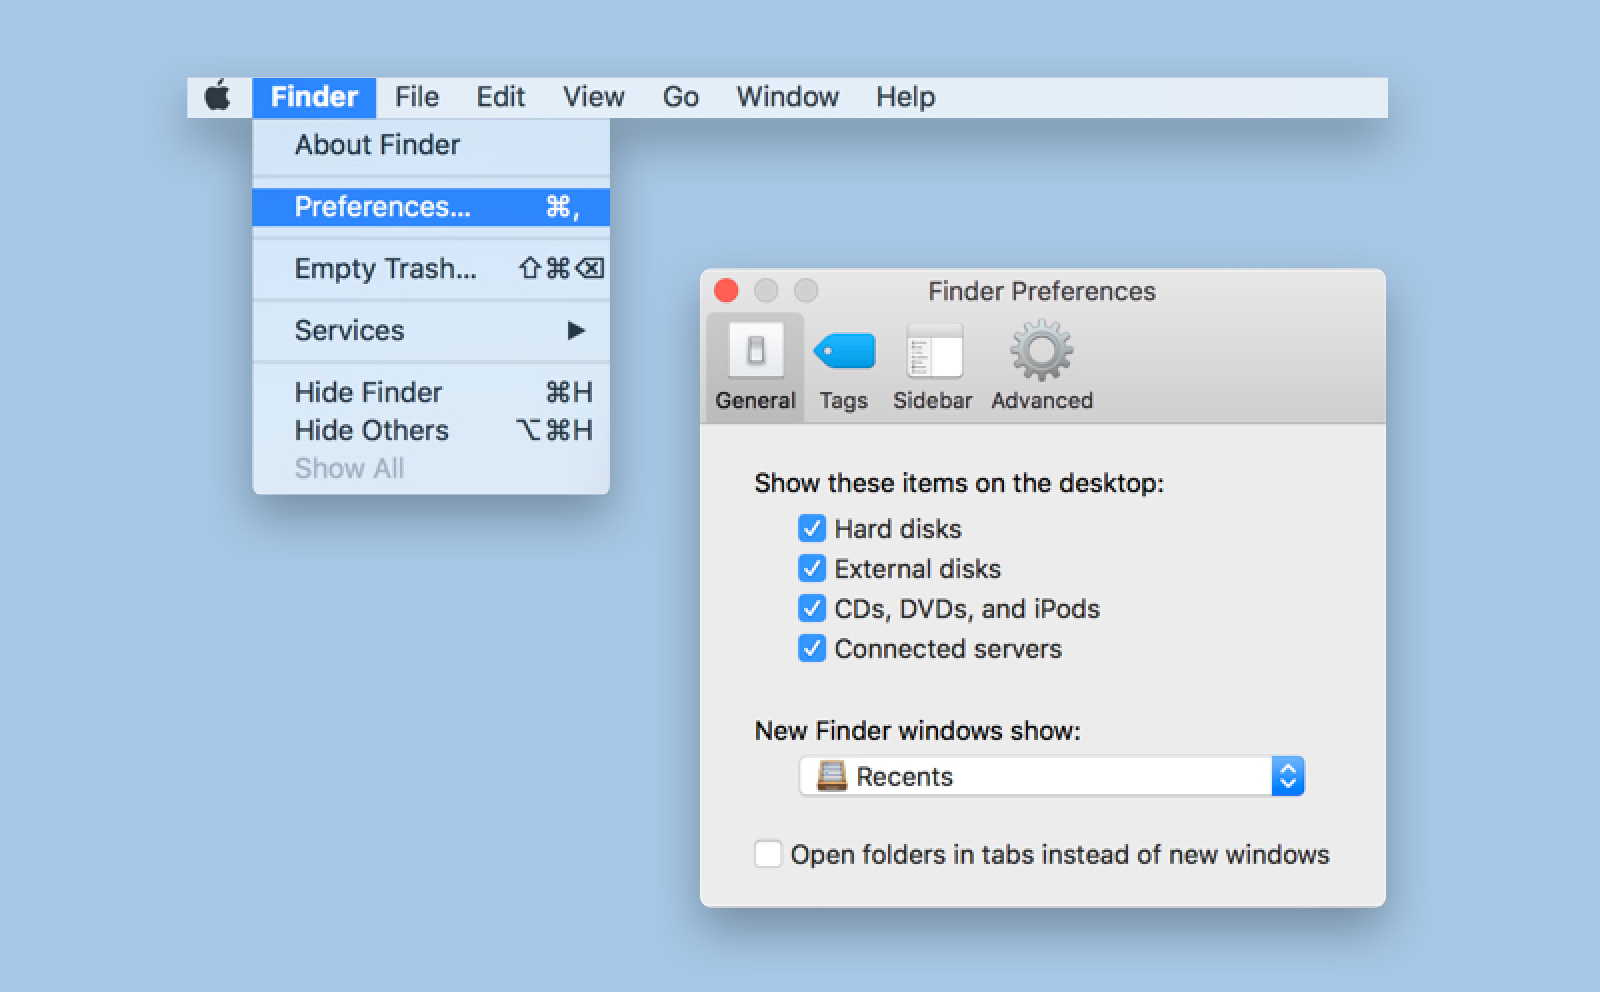 Why a flash drive is not showing up on Mac?